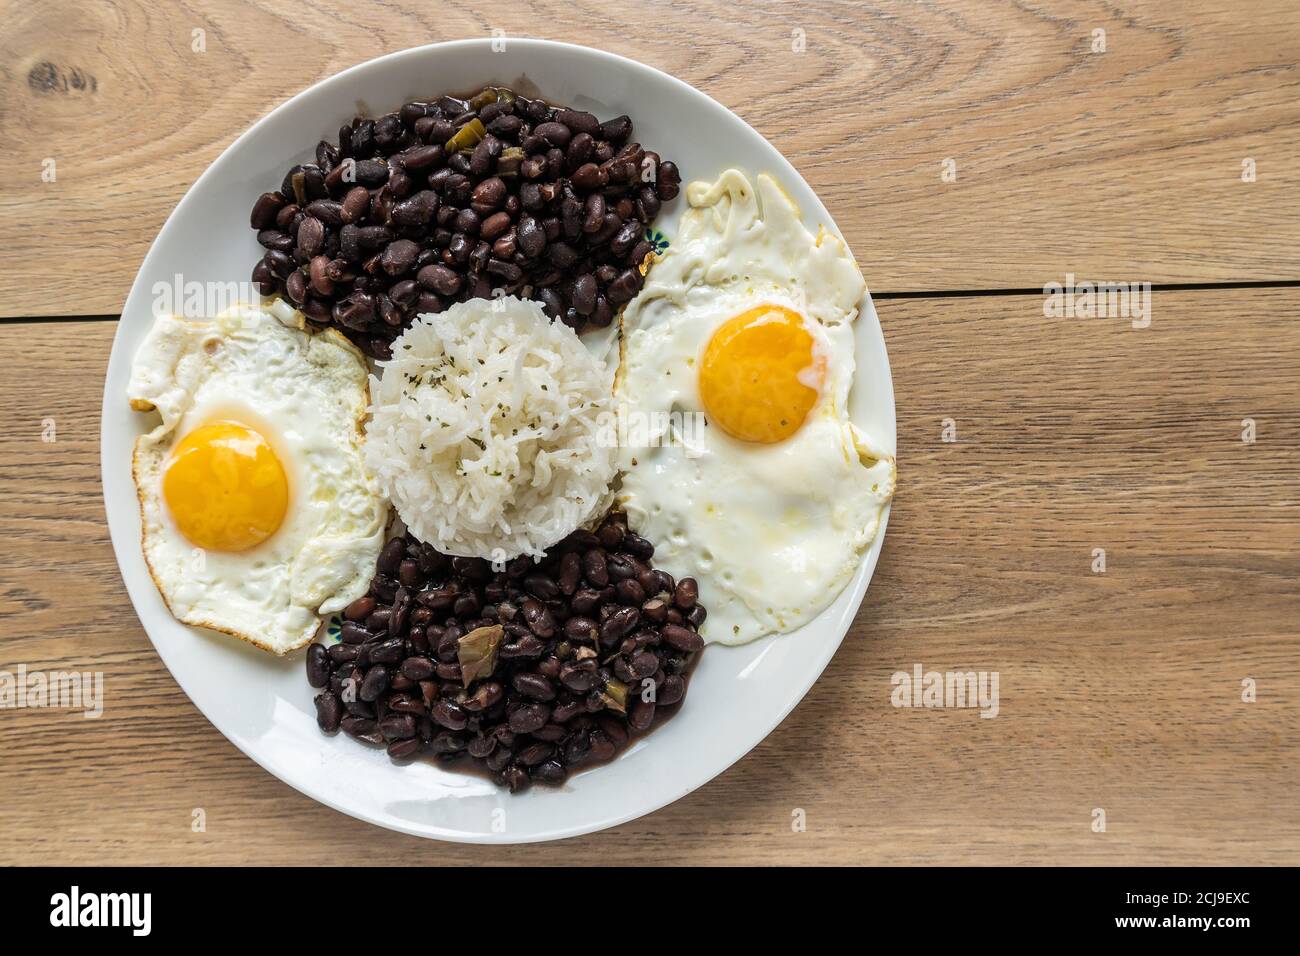 Dish of traditional Cuban cuisine with black beans, rice, and eggs Stock Photo